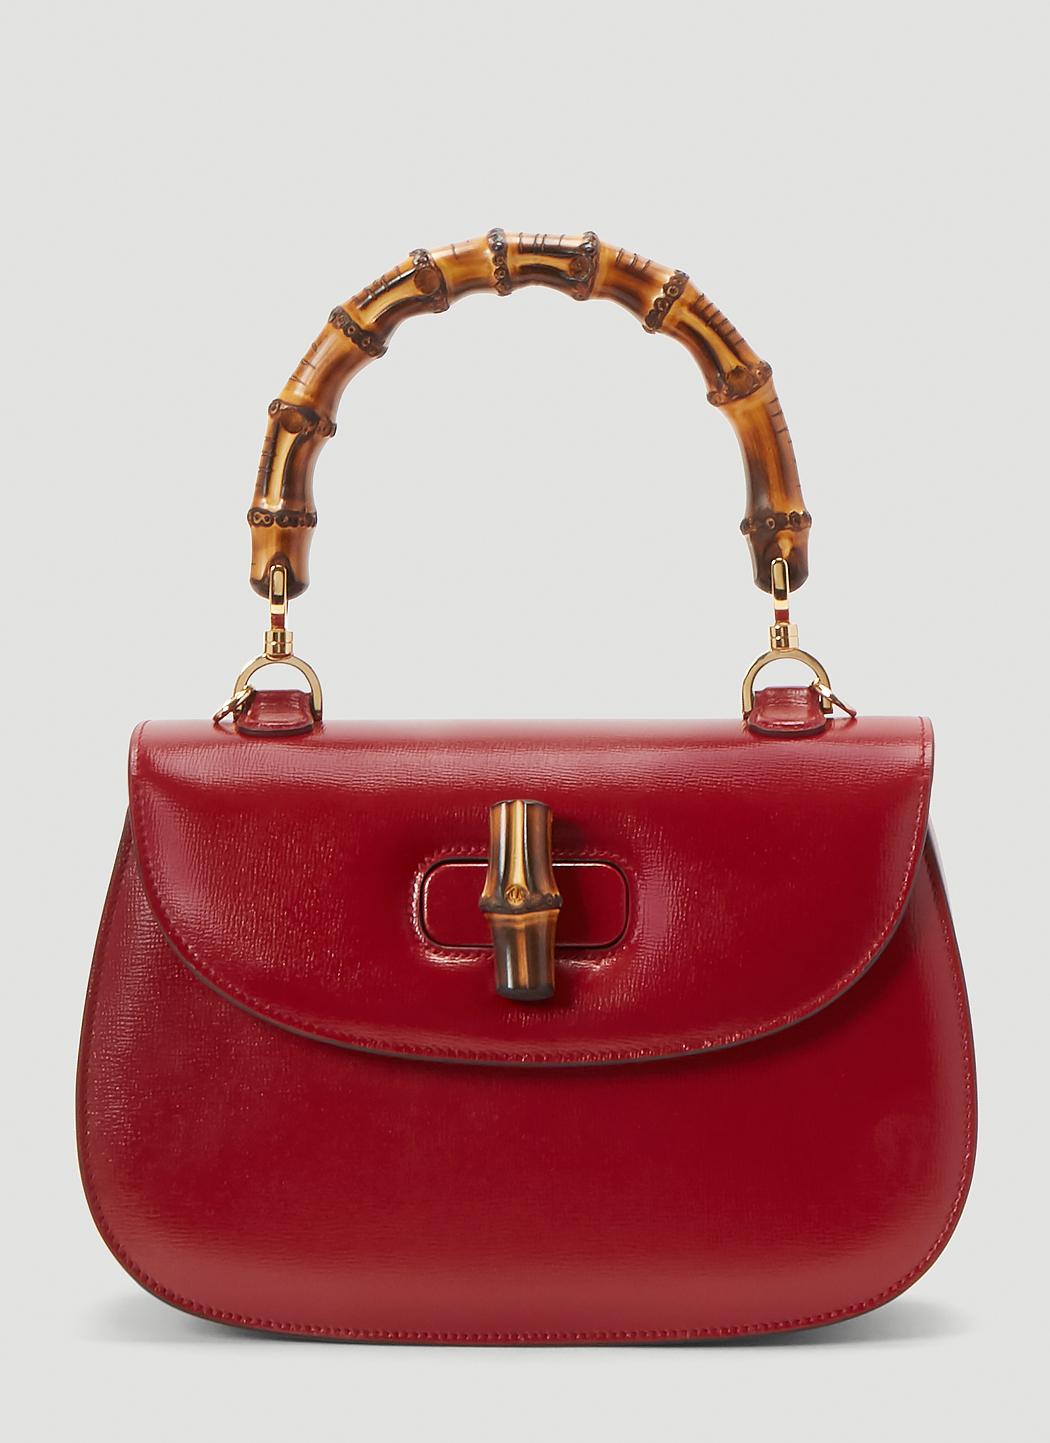 Gucci Bamboo Top Handle Bag In Red